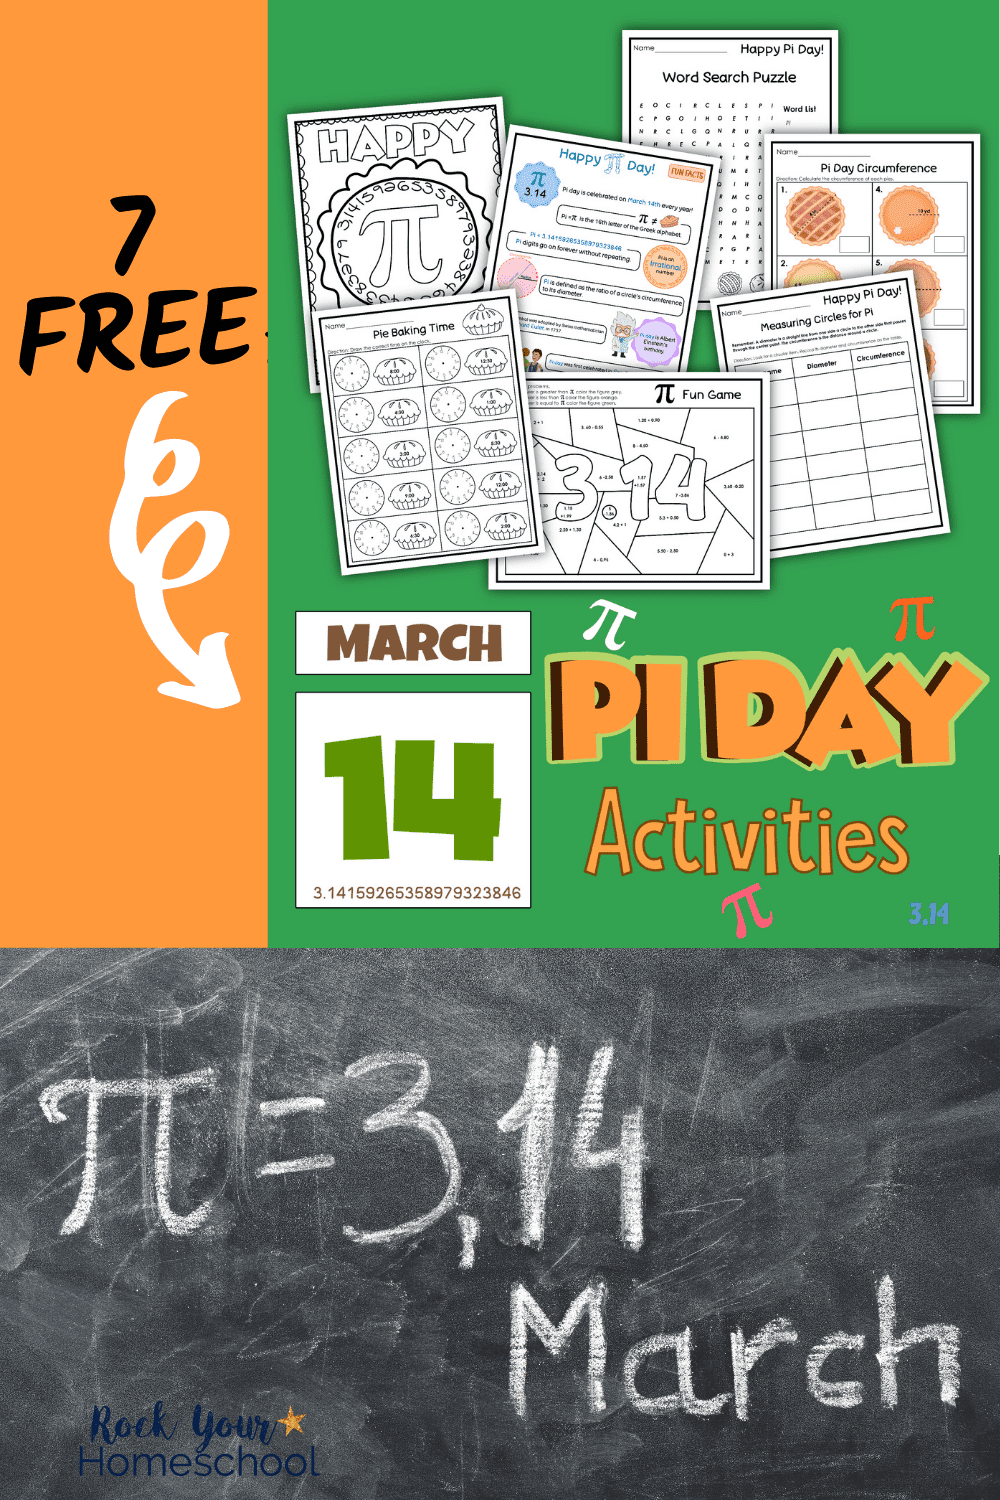 Pi Day Activities for Kids to Enjoy a Fun Celebration (7 Free Printables)